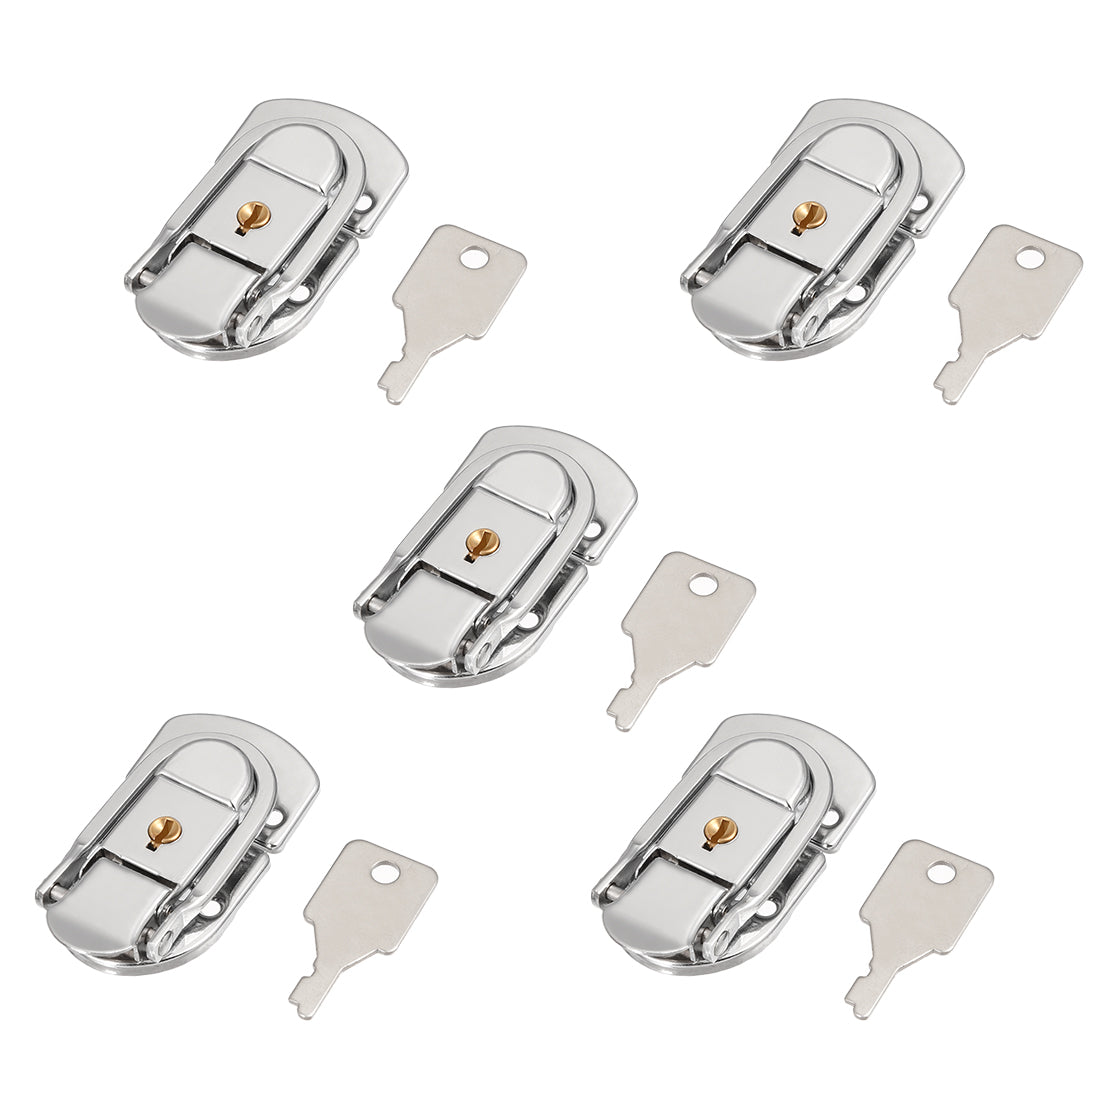 uxcell Uxcell 66mm x 34mm Metal Small Size Suitcase Lock Hasp Catch Latch with Keys 5 Pcs